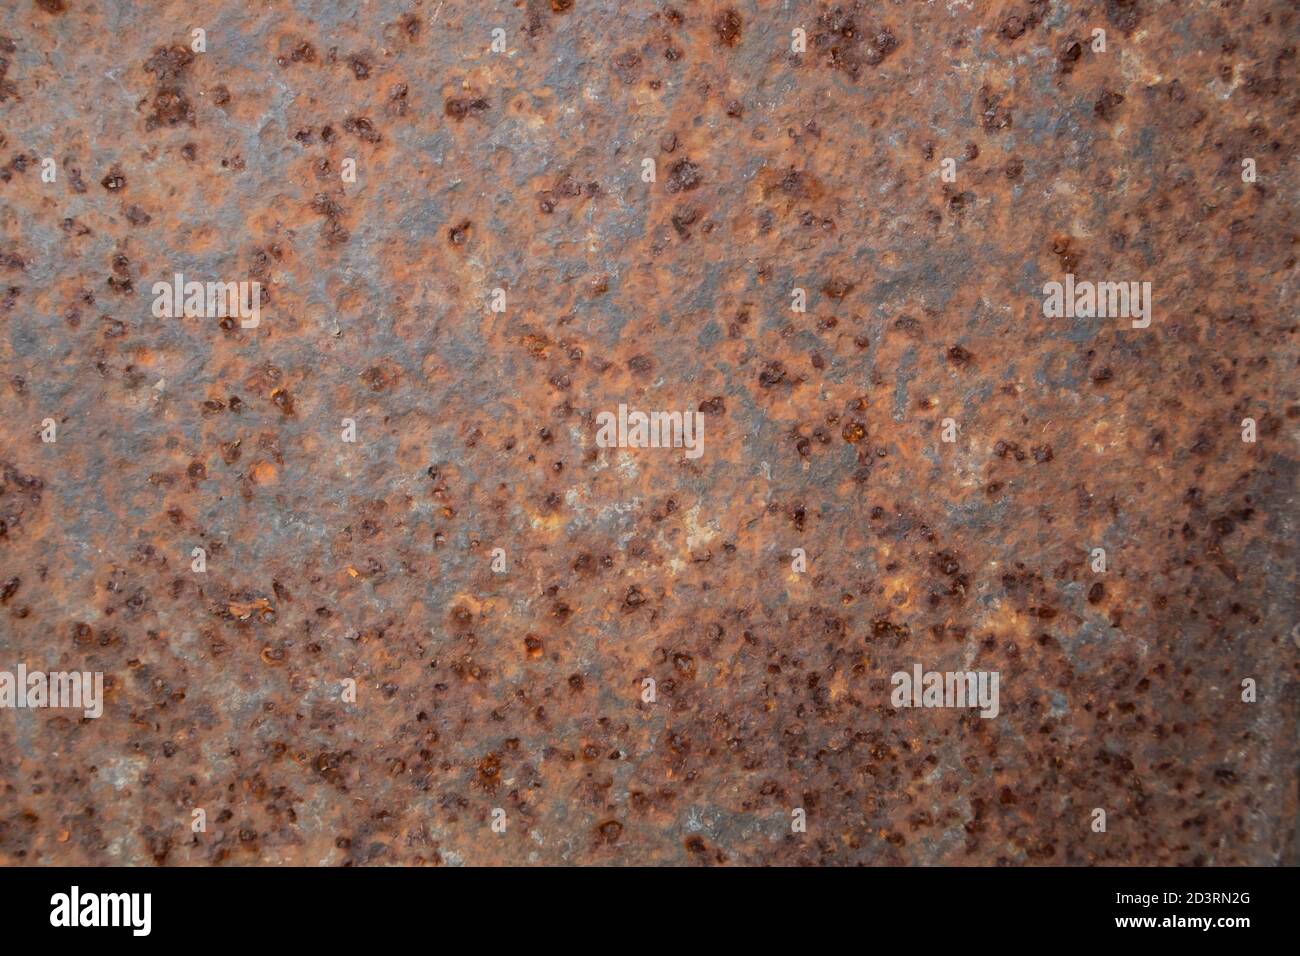 Dark worn out rusty metal sheet. Texture background. Stock Photo